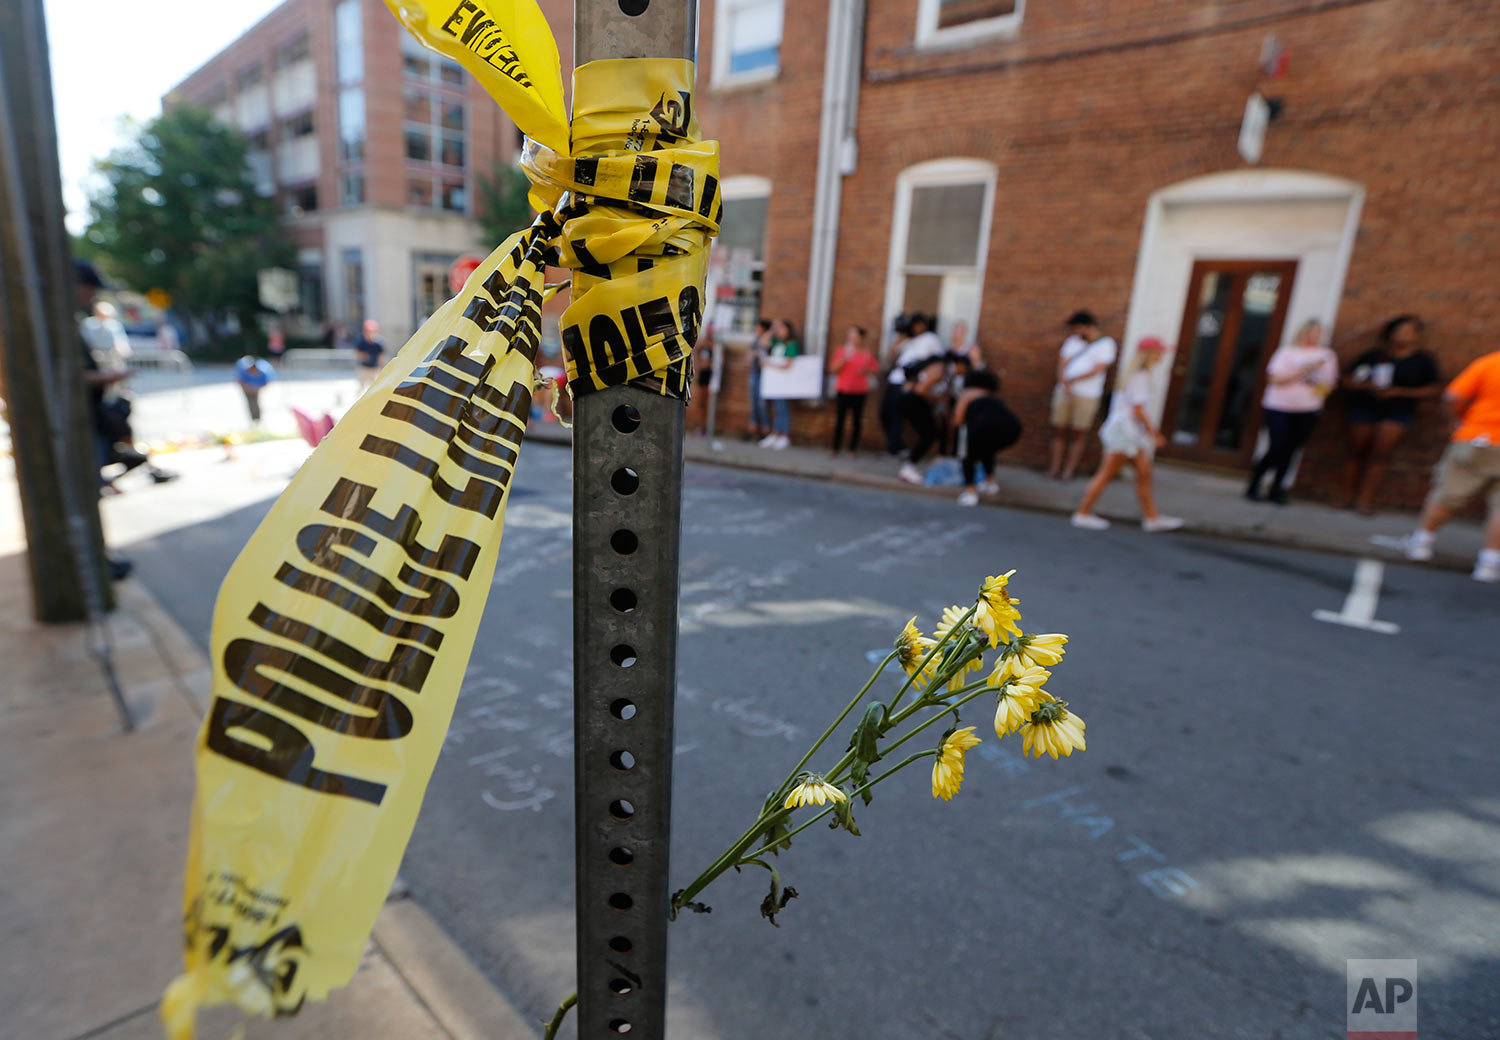  On Sunday, Aug. 13, 2017, police tape and flowers mark the site where a car plowed into a crowd of people protesting a white nationalist rally on Saturday in Charlottesville, Va. (AP Photo/Steve Helber) 